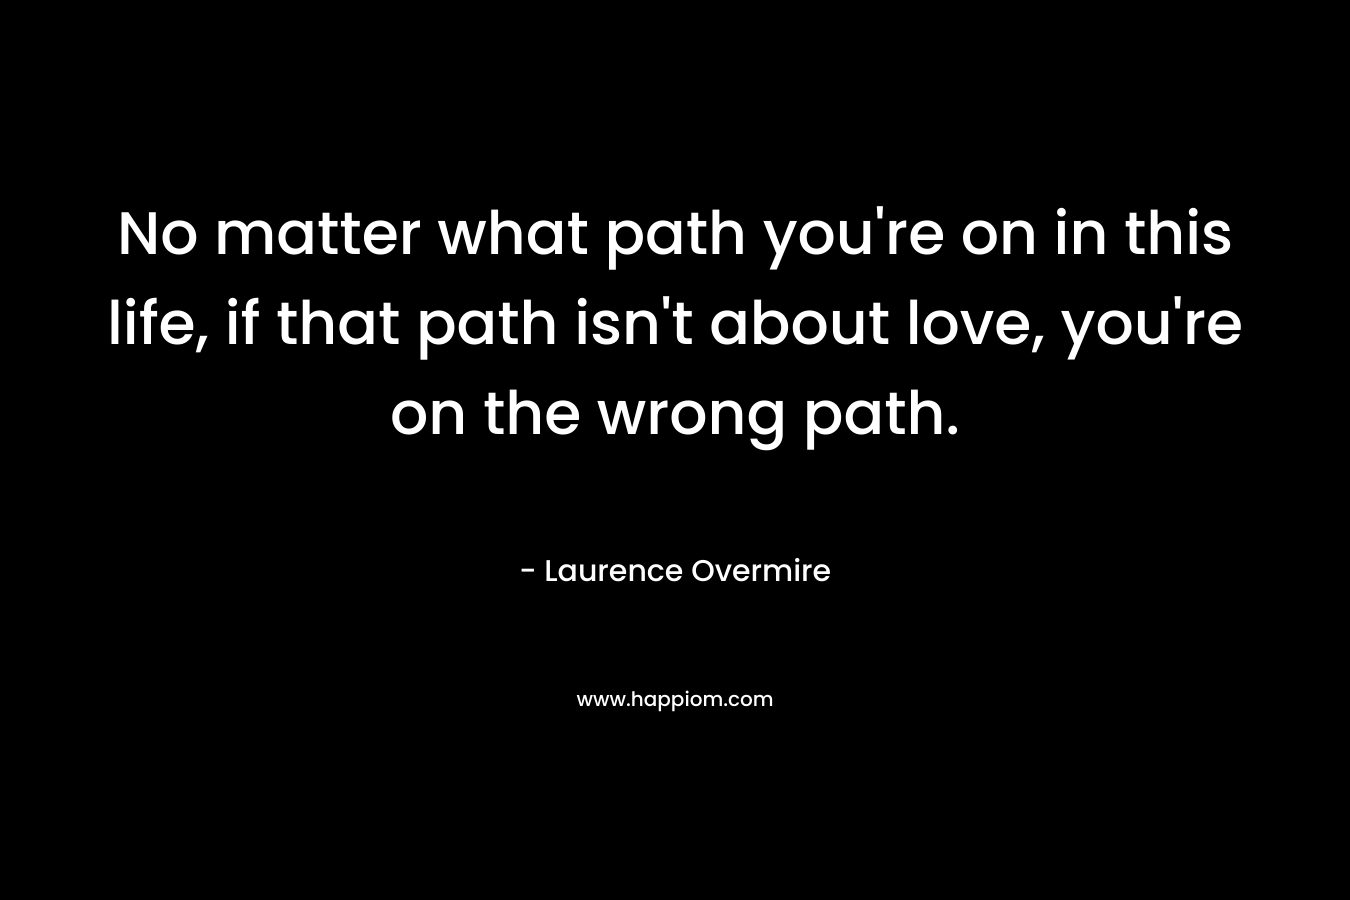 No matter what path you're on in this life, if that path isn't about love, you're on the wrong path.